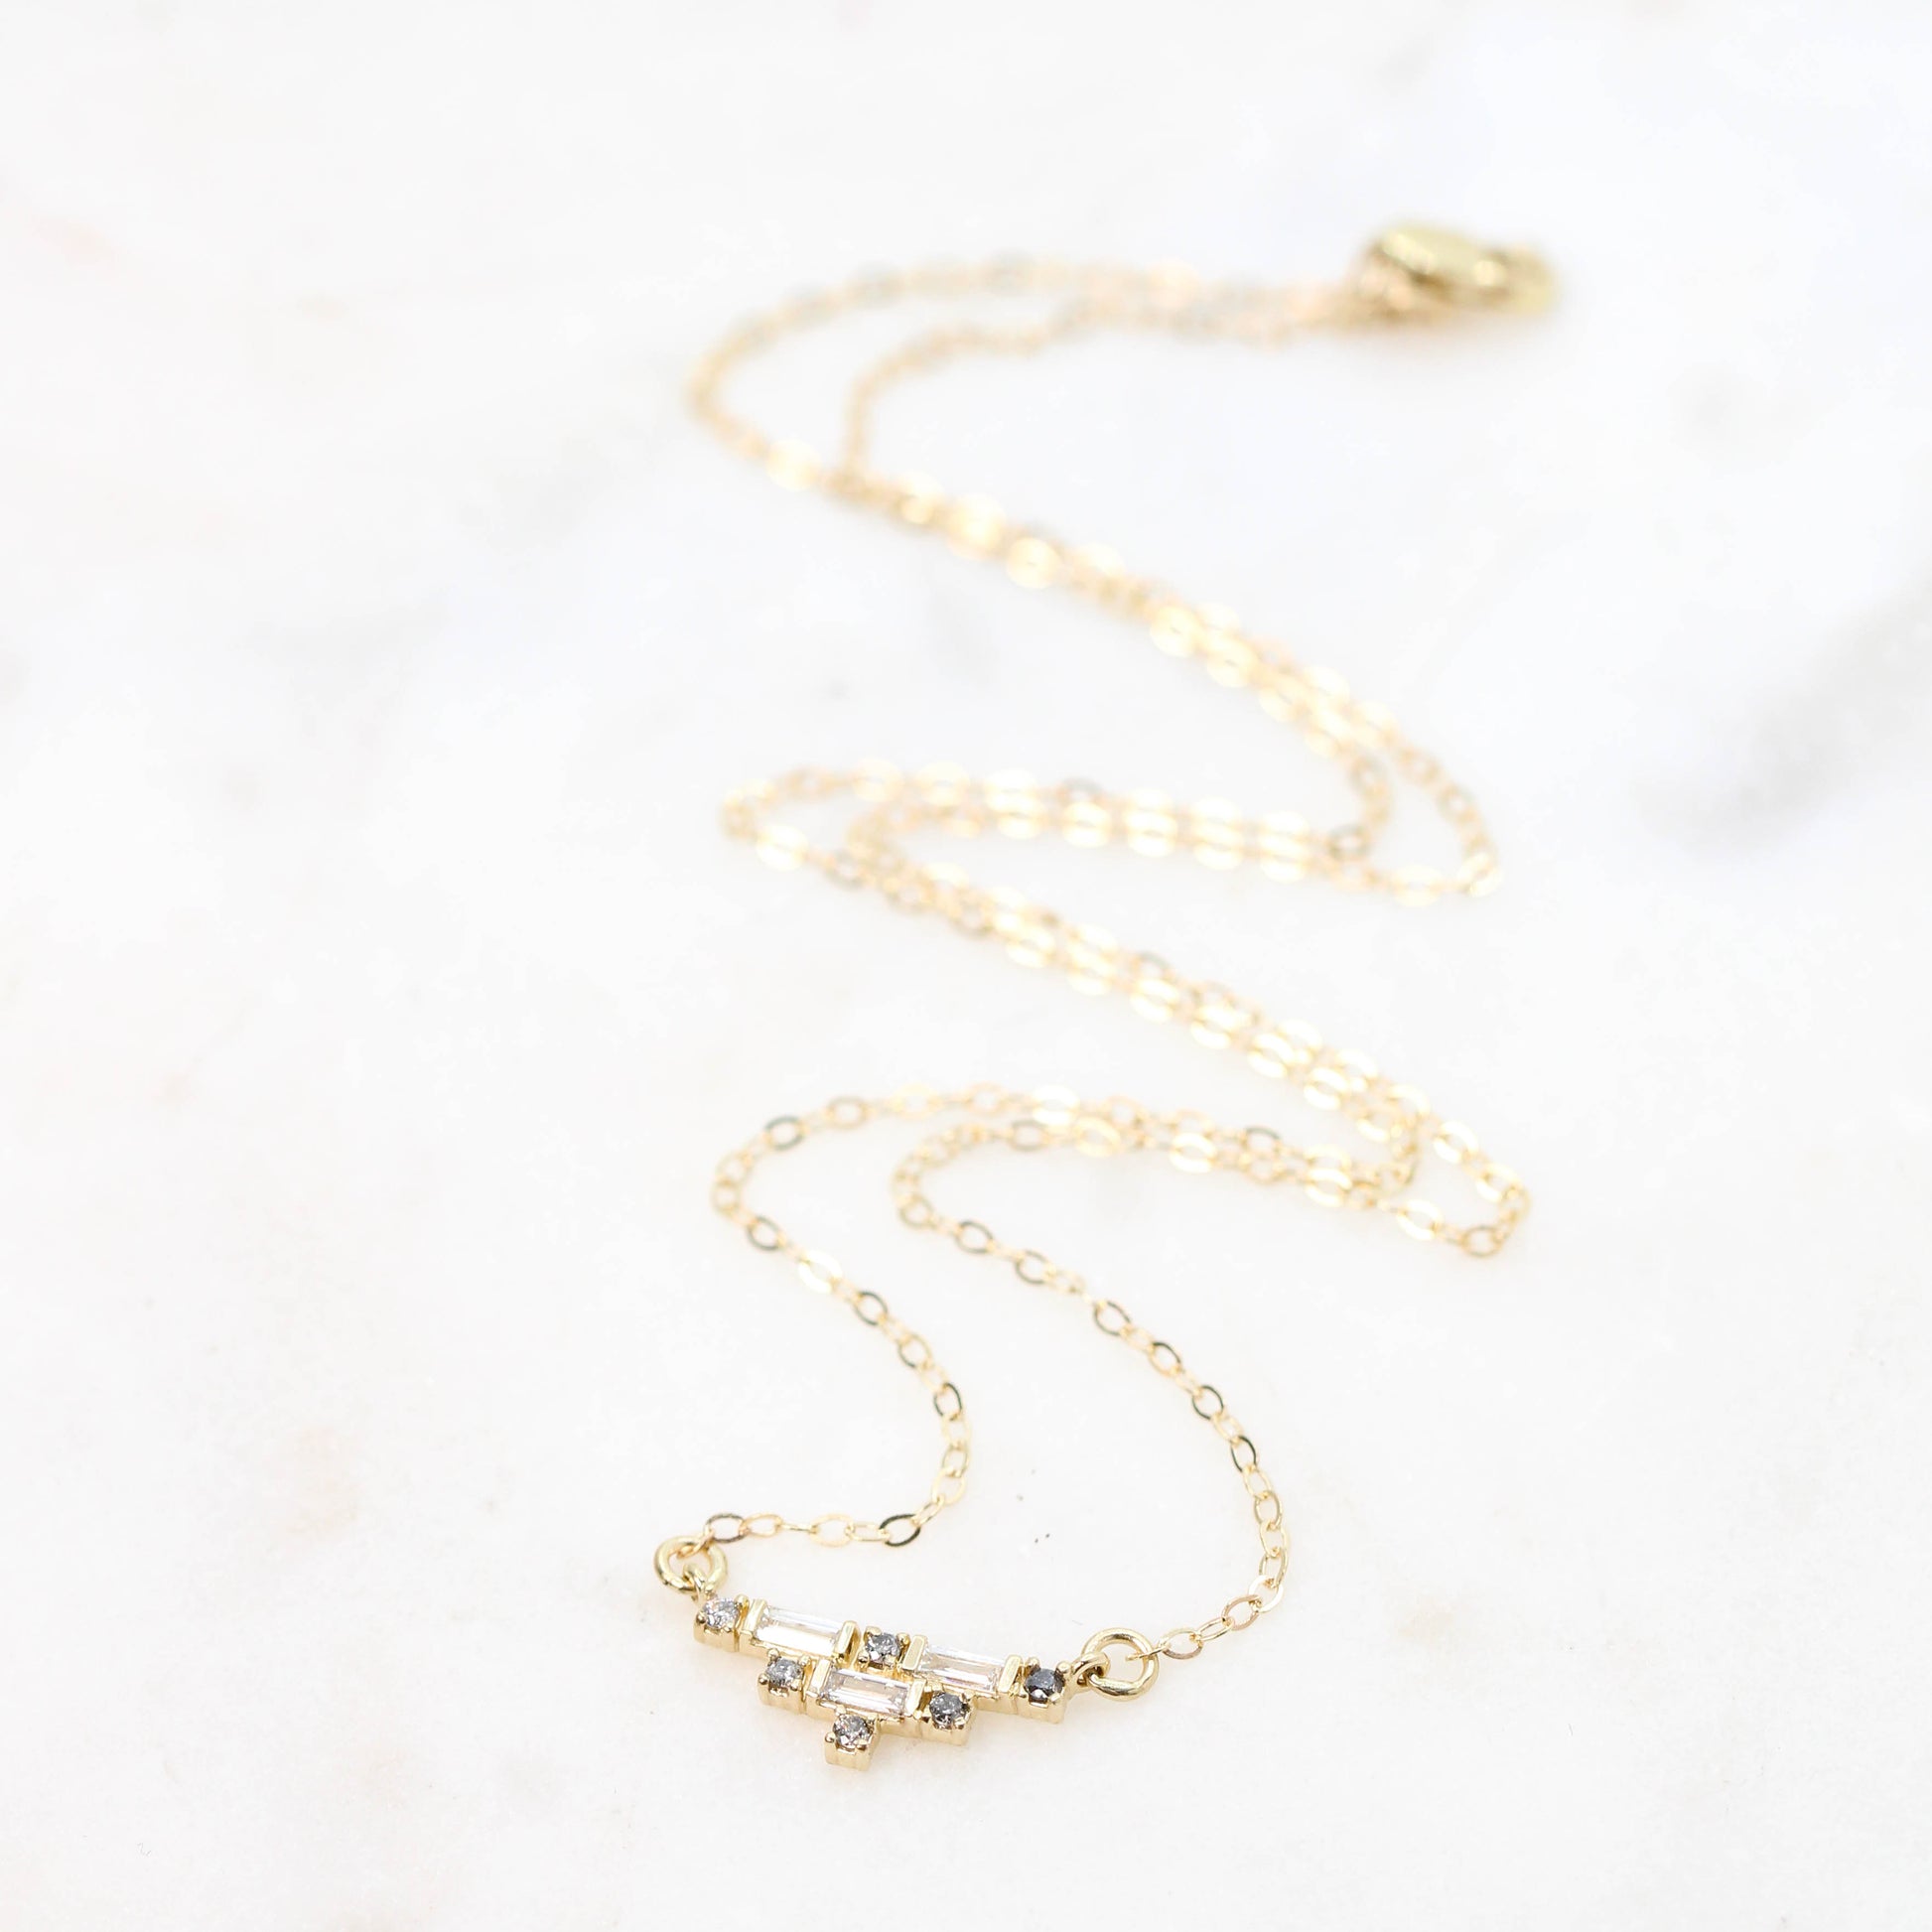 Rashida Necklace with Gray Toned Celestial Diamonds and White Baguette Diamonds - Ready to Ship - Midwinter Co. Alternative Bridal Rings and Modern Fine Jewelry